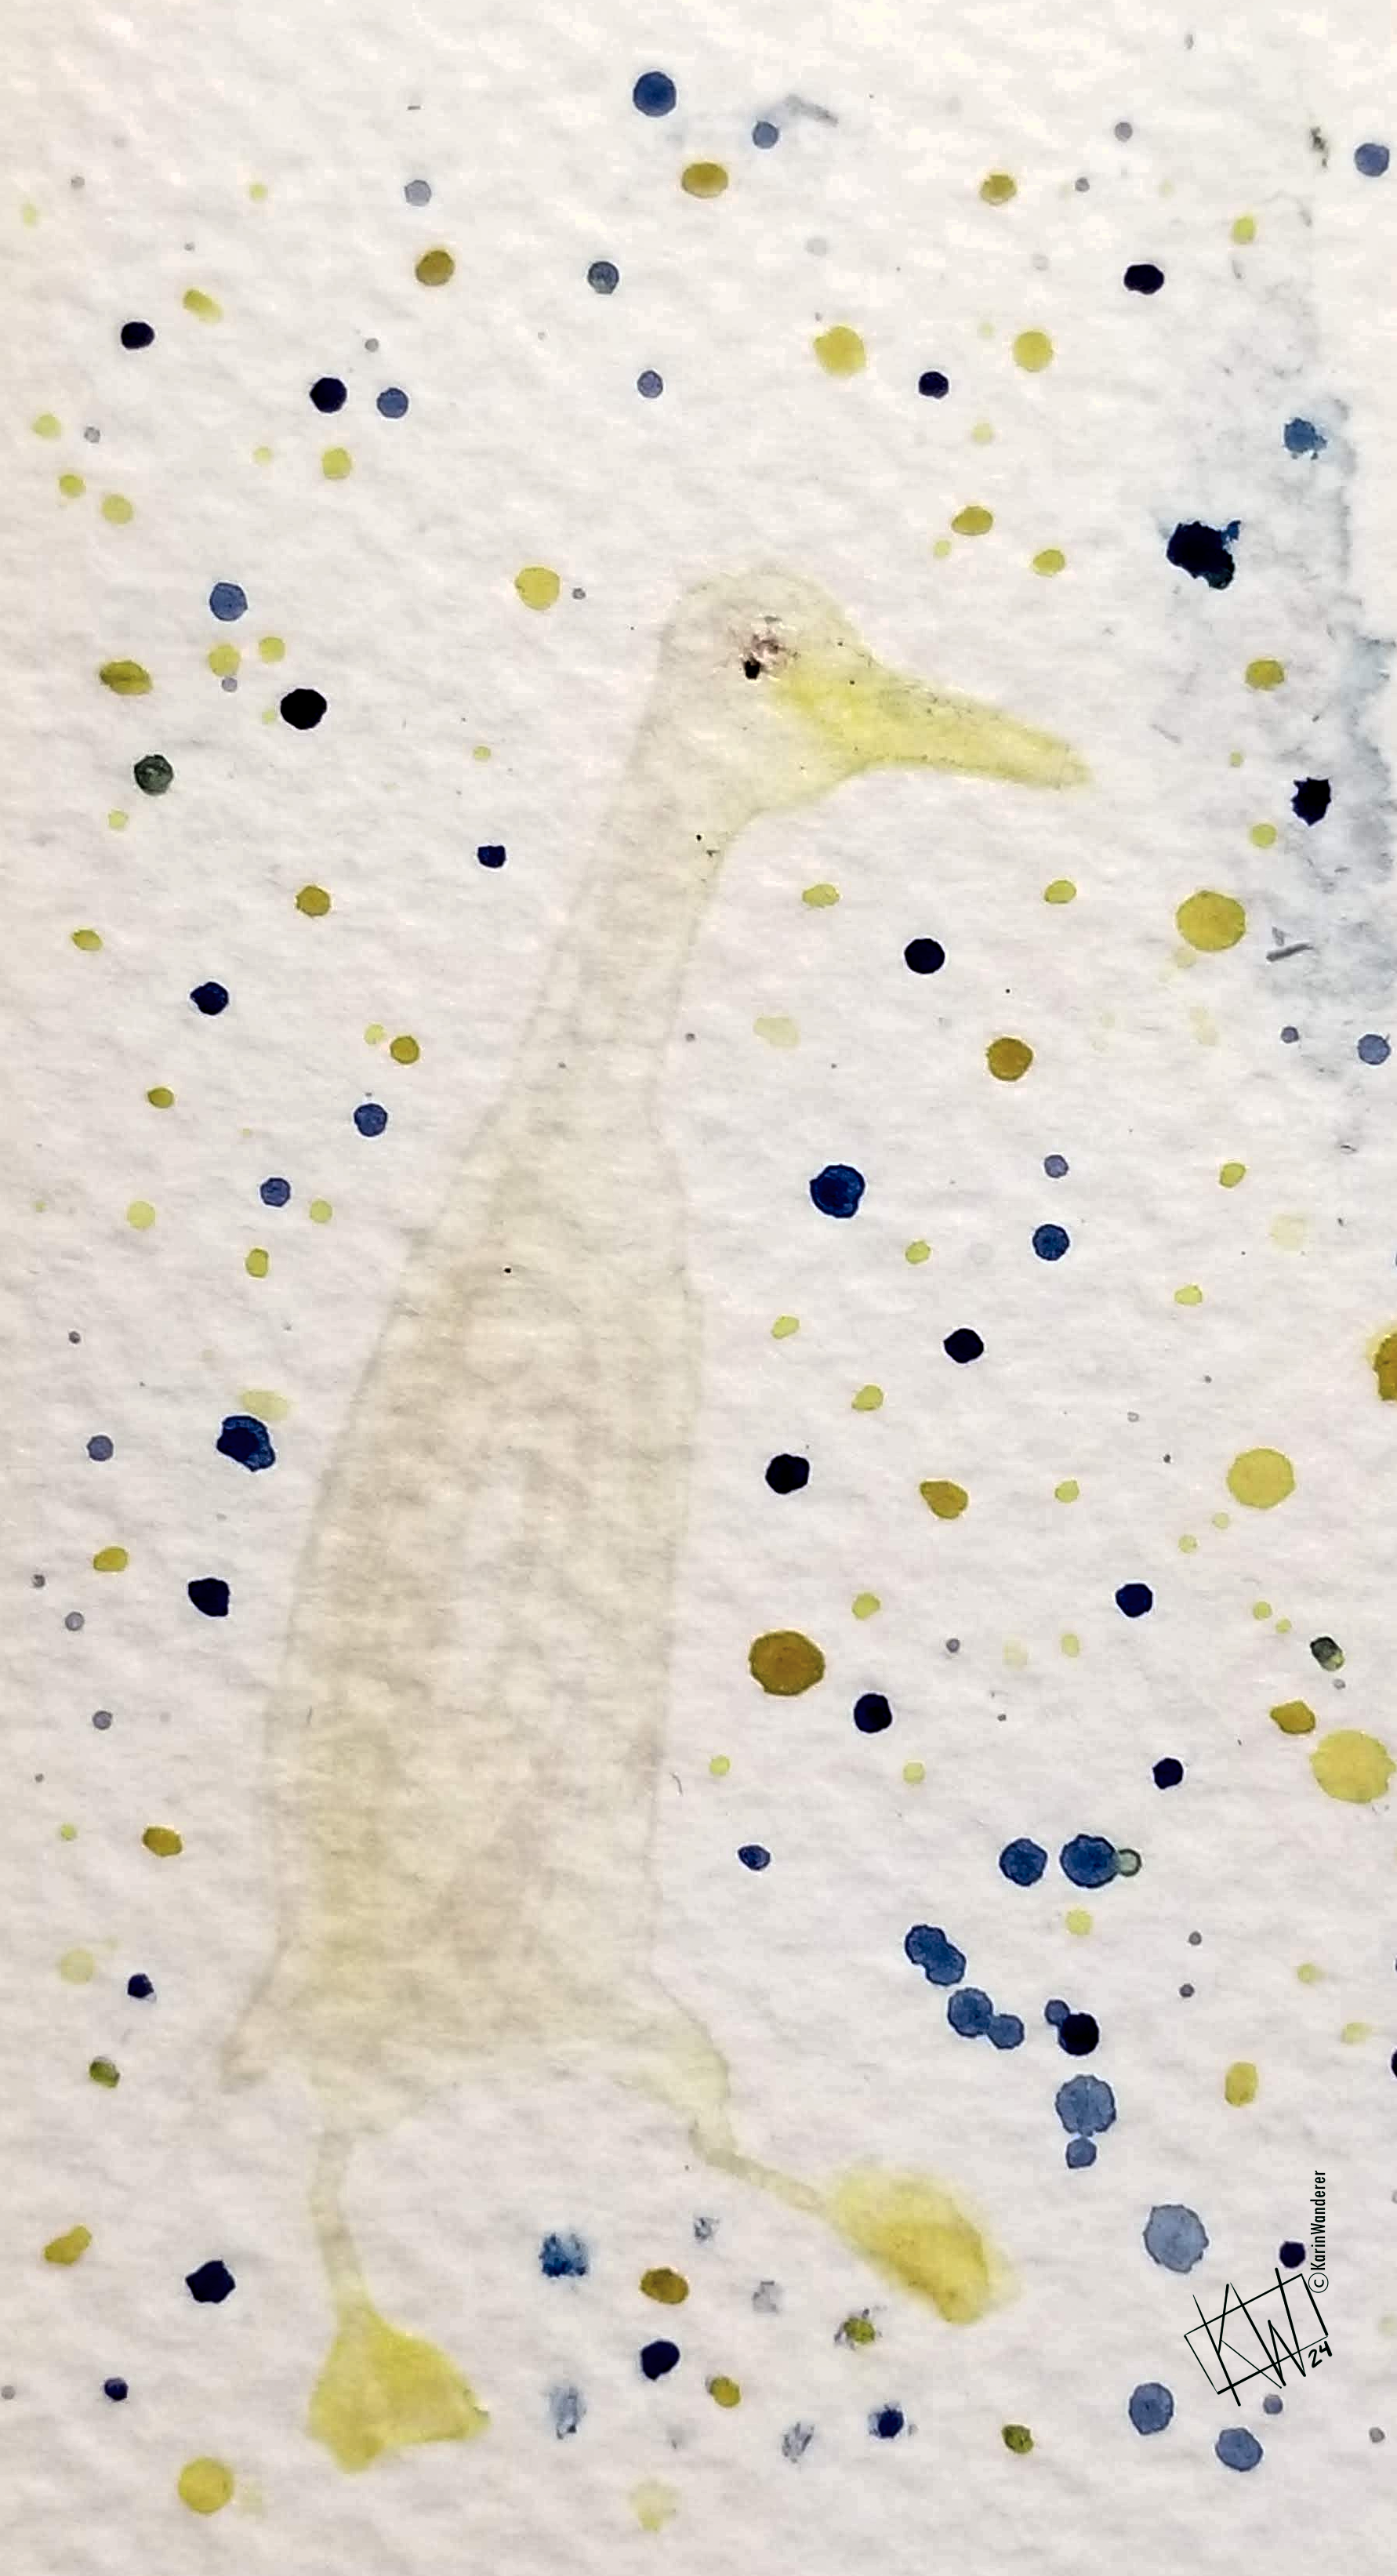 Watercolor Runner duck surrounded by blue & yellow dots.